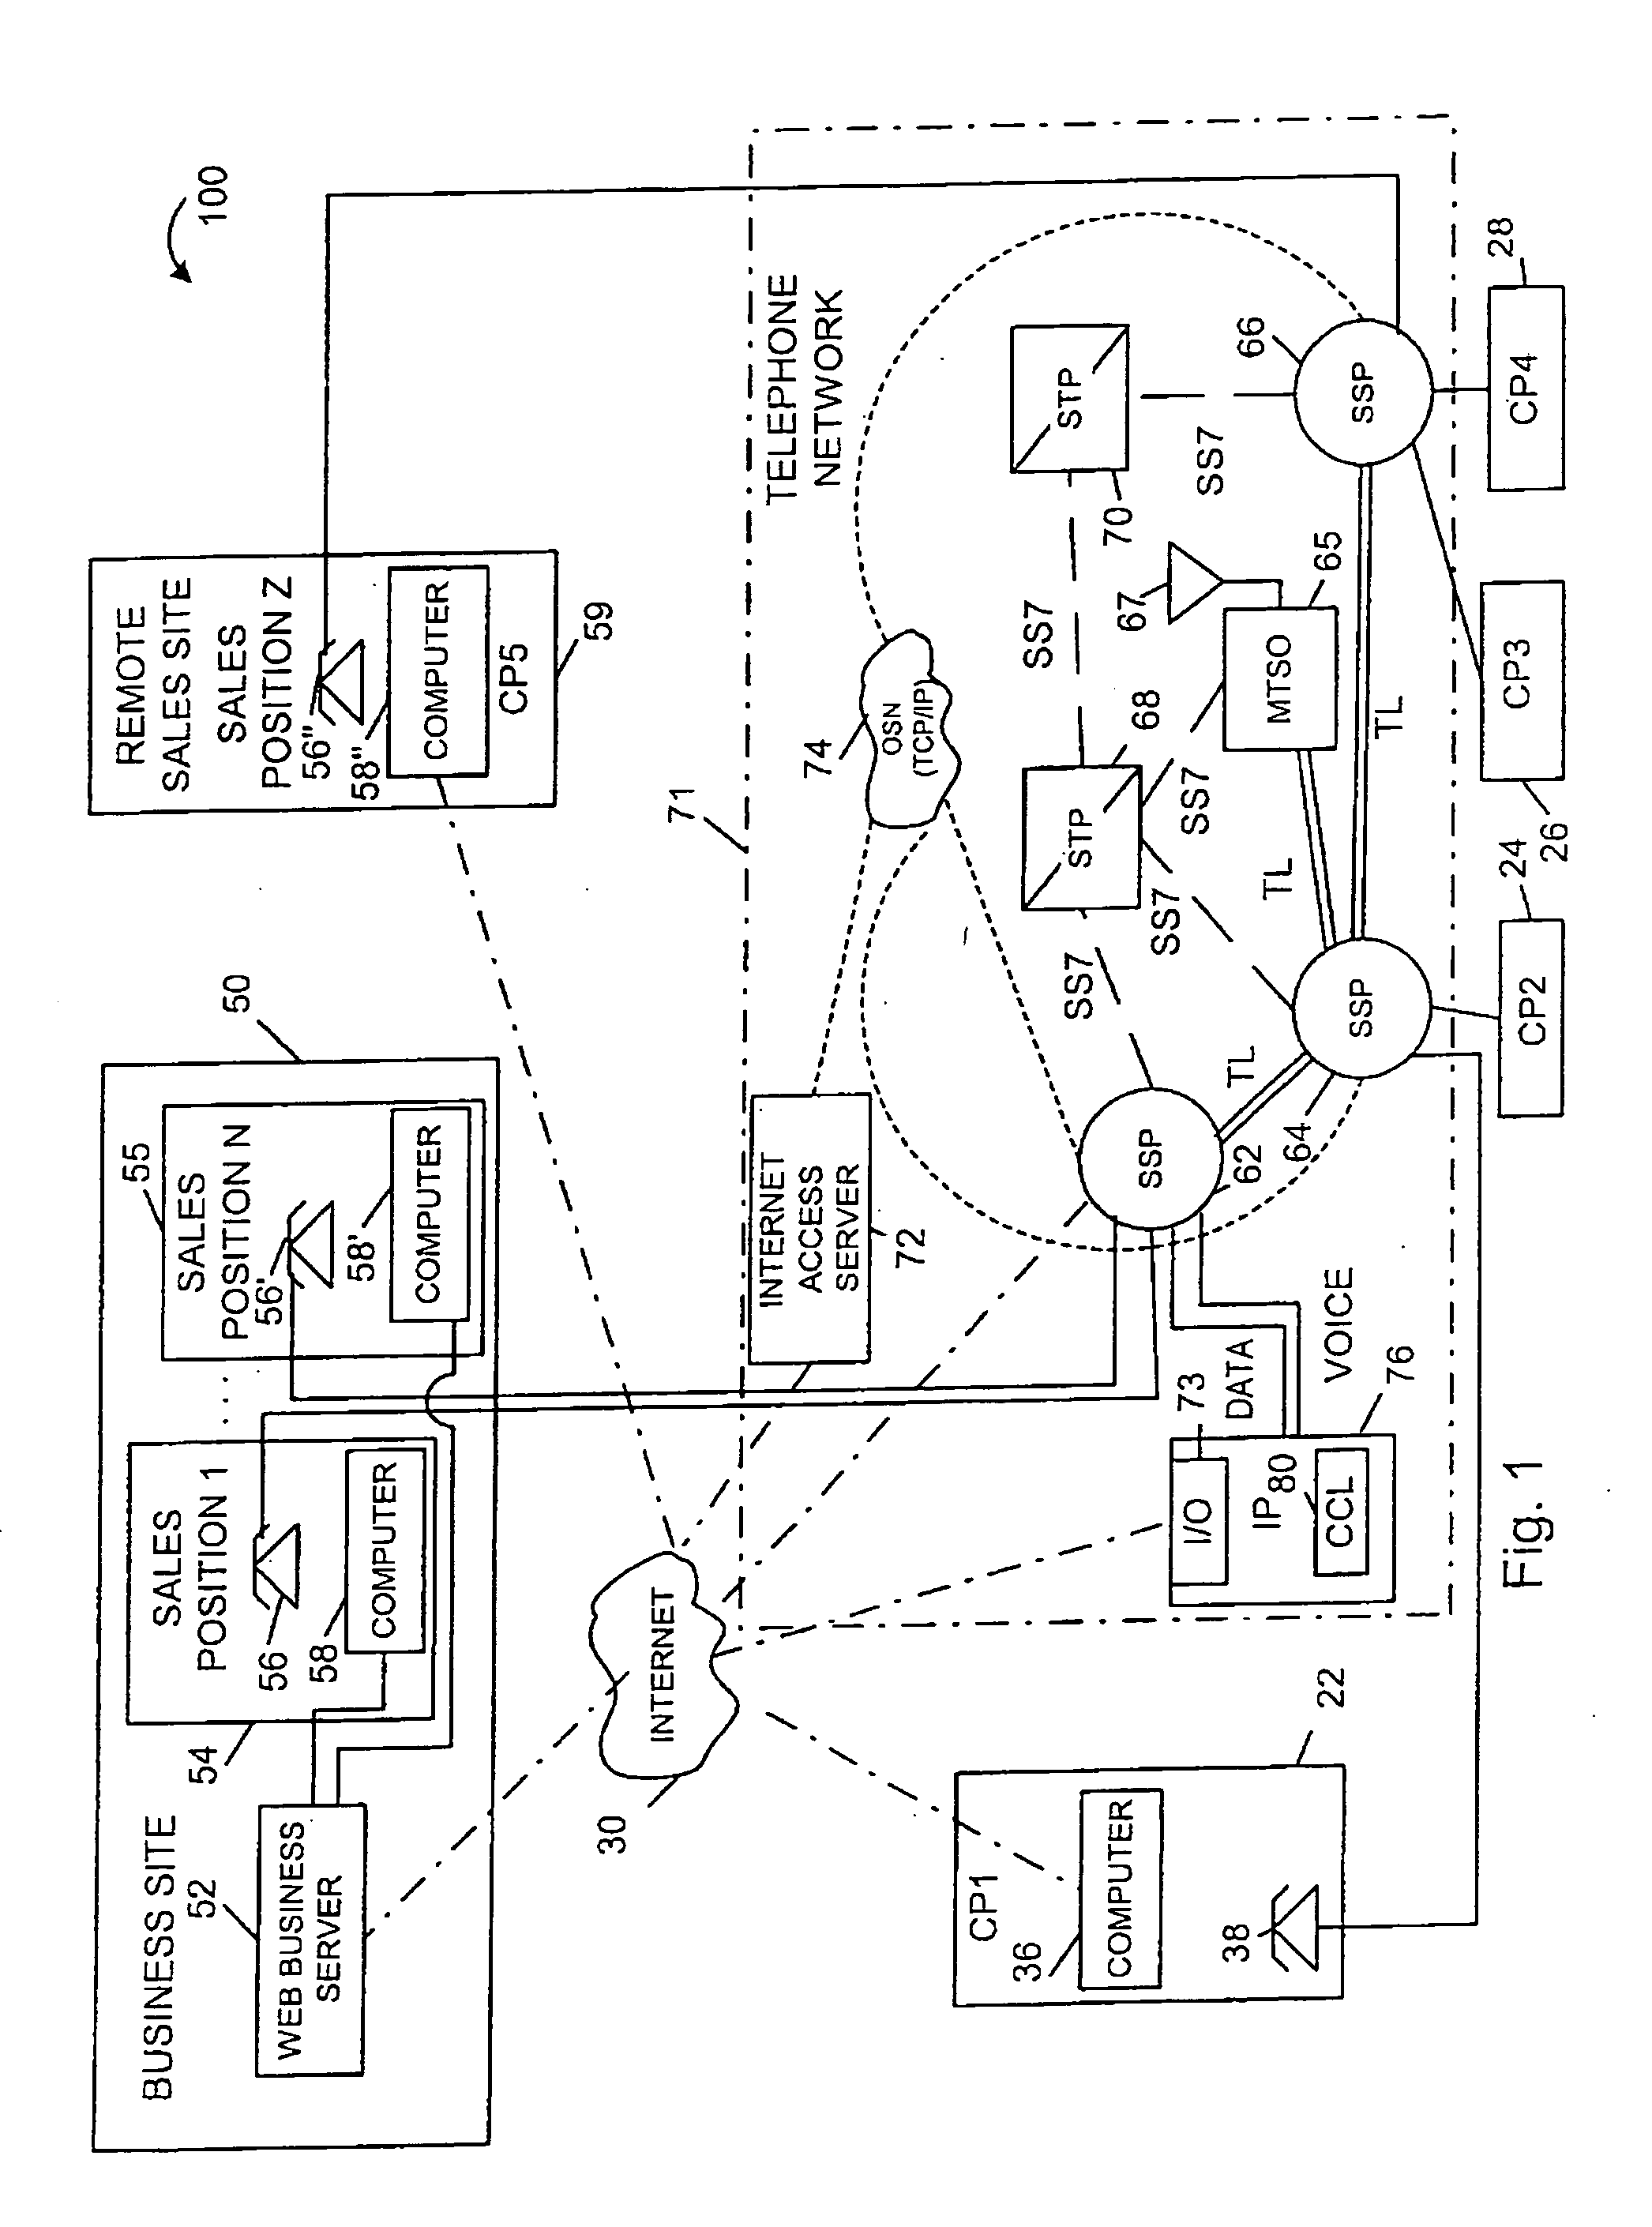 Methods and apparatus for providing telephone support for internet sales